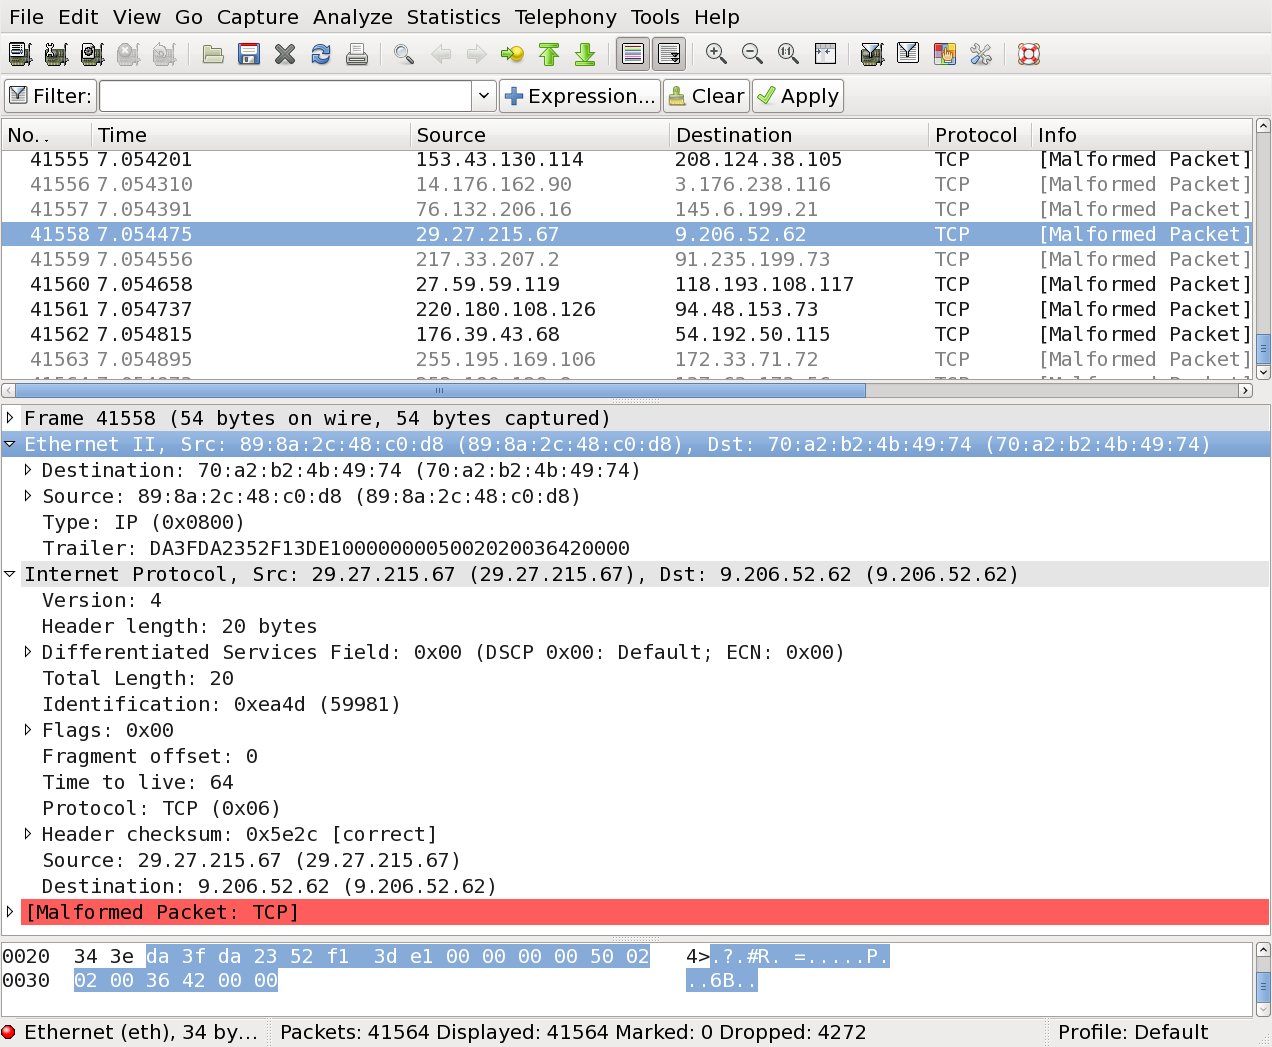 wireshark filters deauthentication attacks